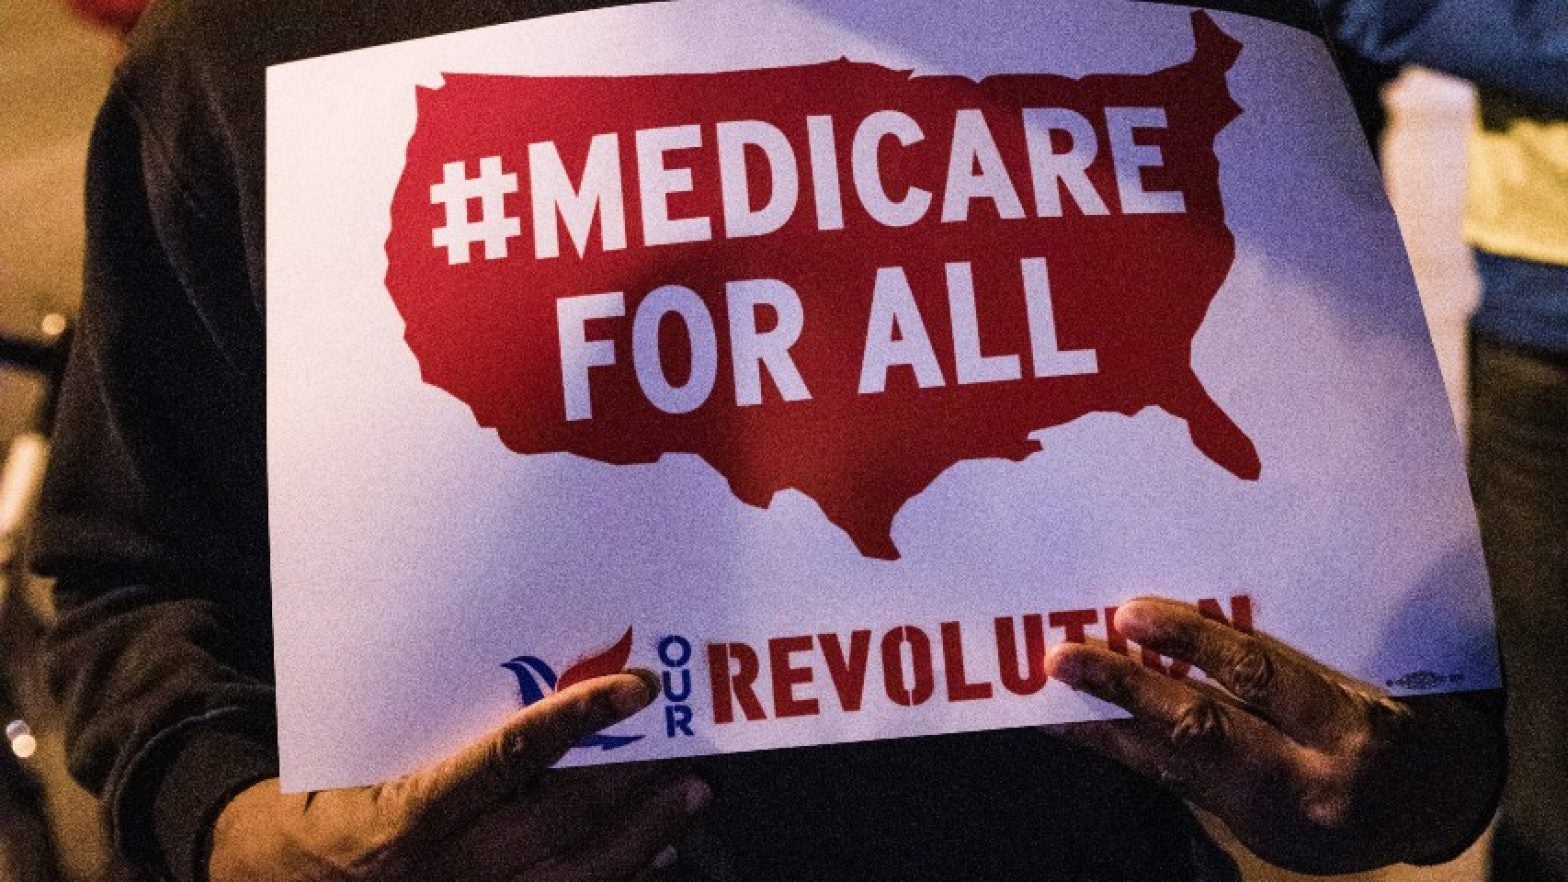 Protestors in Several Dozen Cities to March for Medicare for All this Saturday